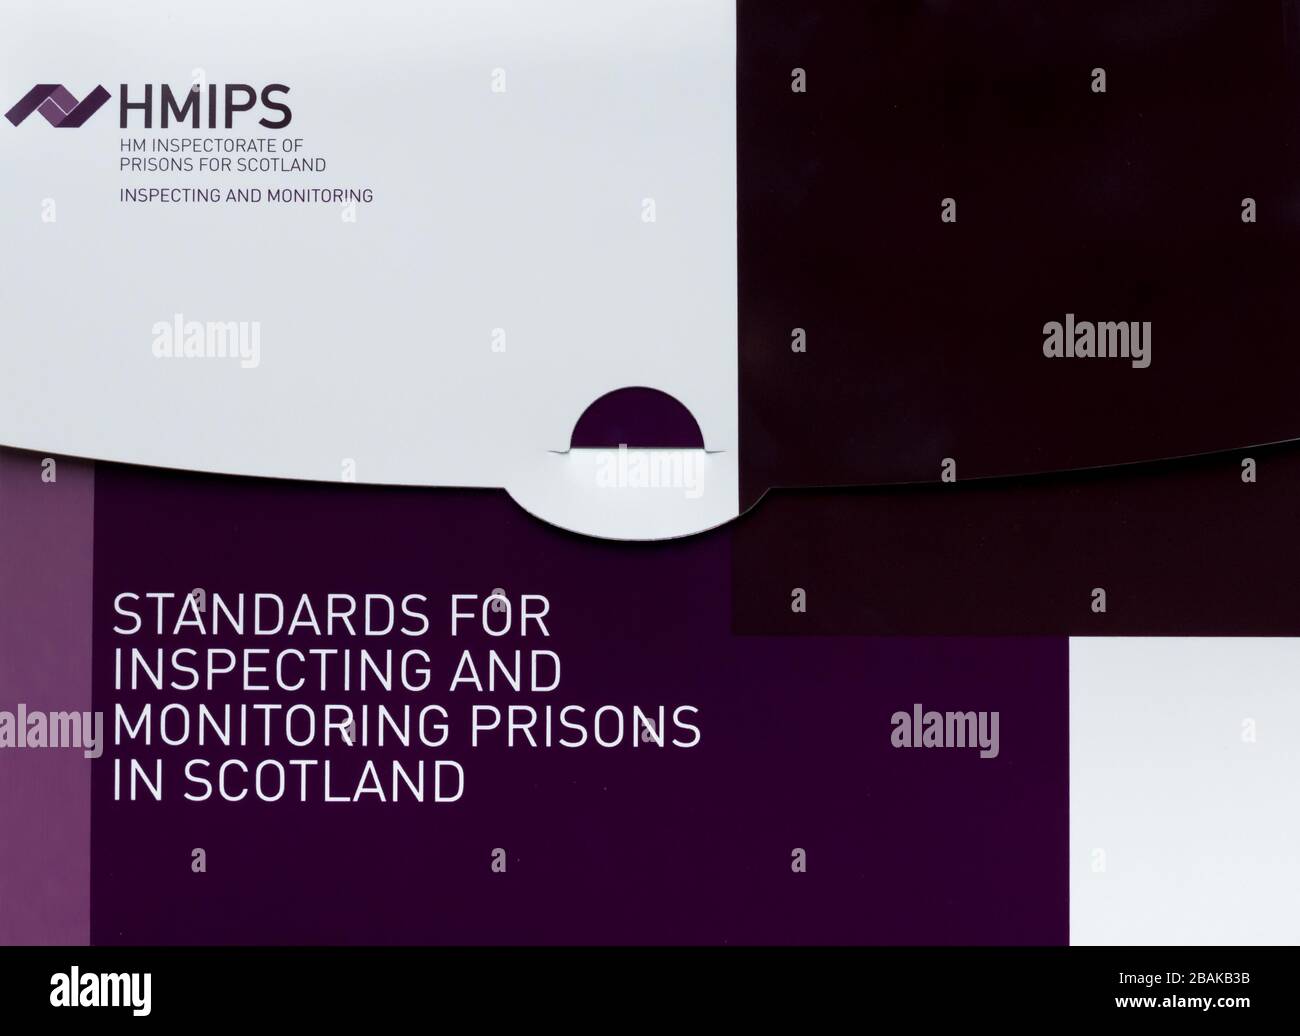 Standards for Inspecting and Monitoring Prisons in Scotland; guidance information for HMIPS & prison monitors, UK Stock Photo